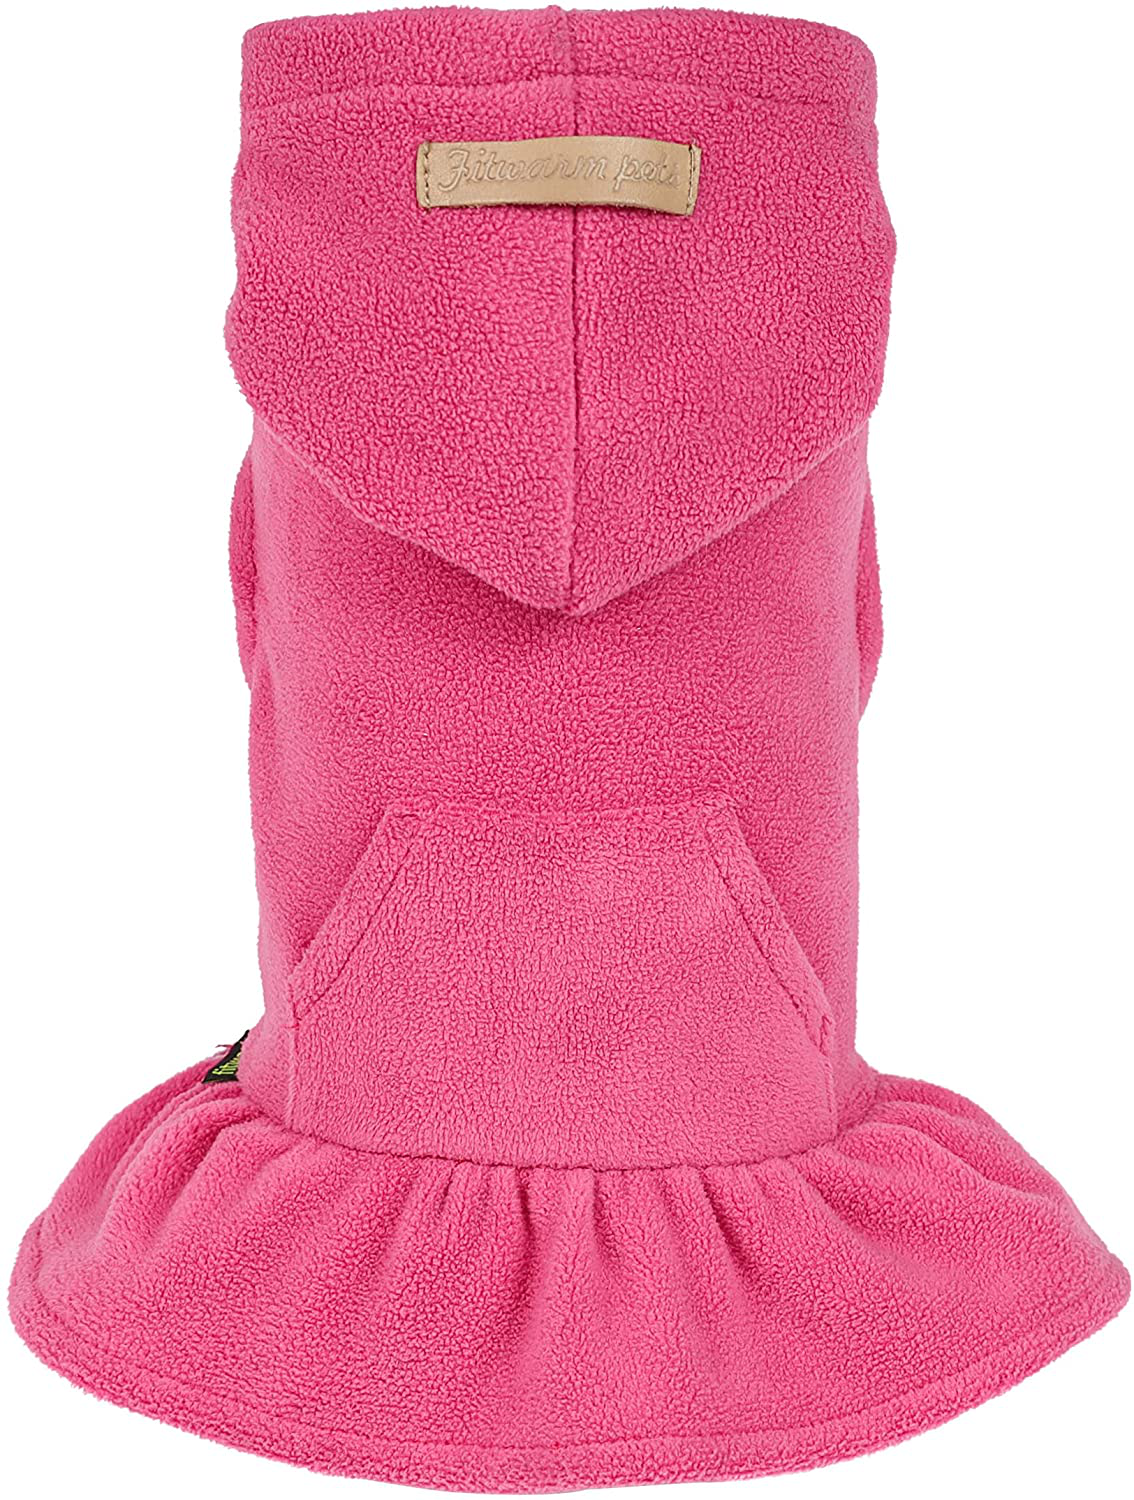 Fitwarm Soft Fleece Girl Dog Hoodie Dress Puppy Hooded Coat Thermal Outfit Doggie Vest Sweater Pet Winter Clothes Cat Jackets